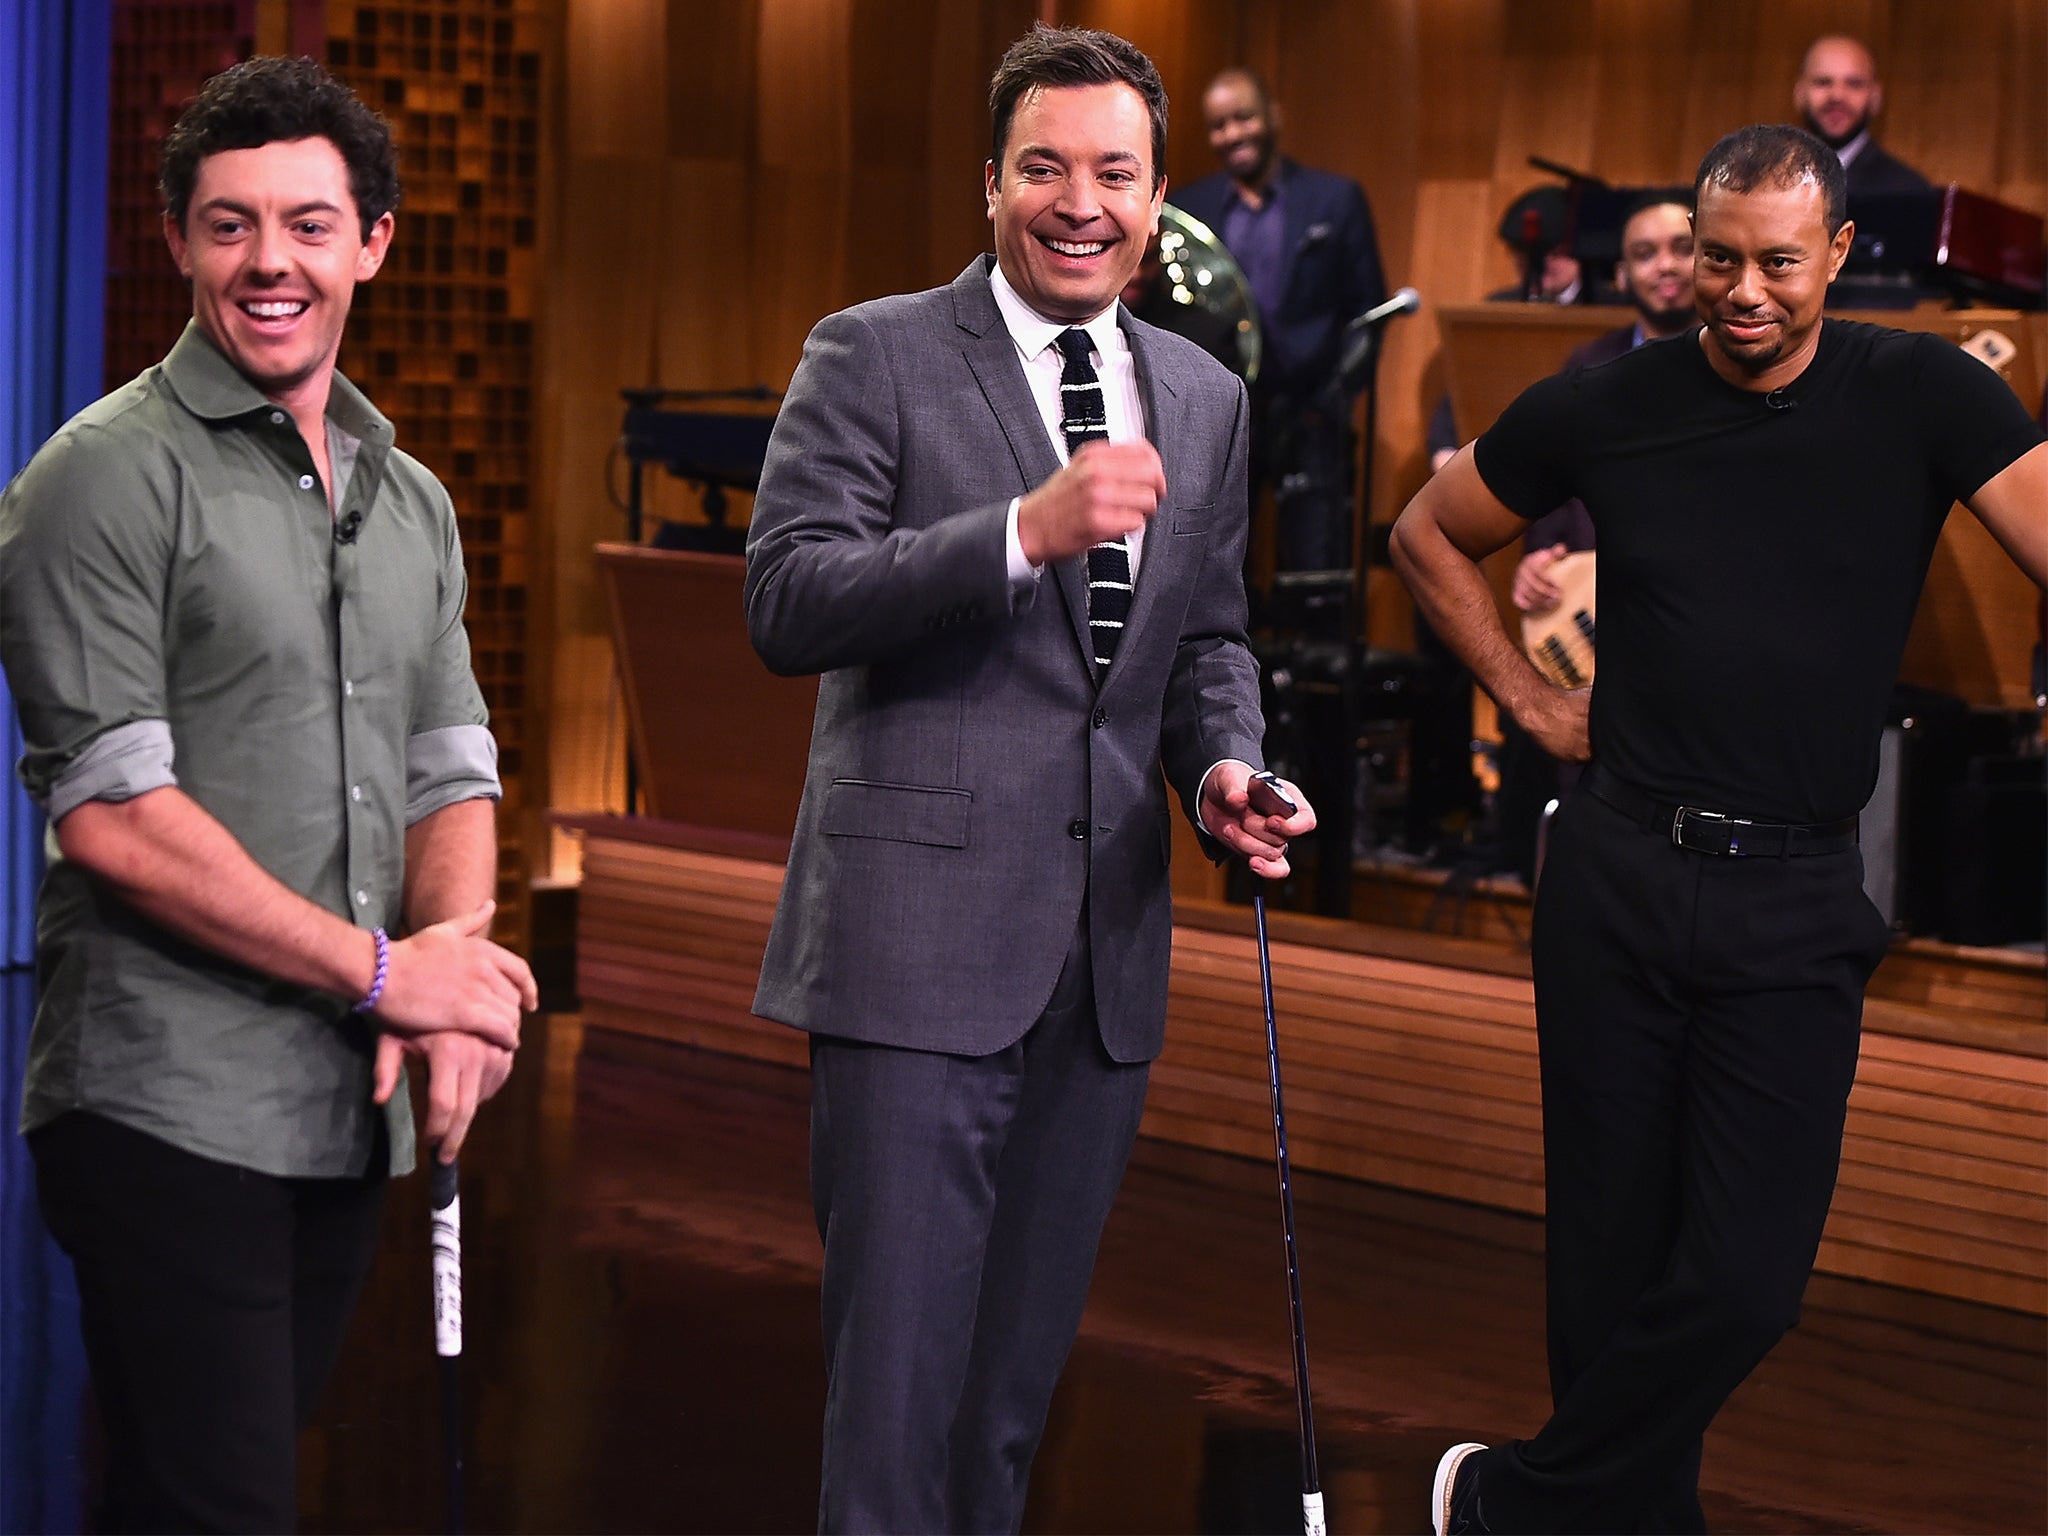 Rory McIlroy alongside Jimmy Fallon and Tiger Woods